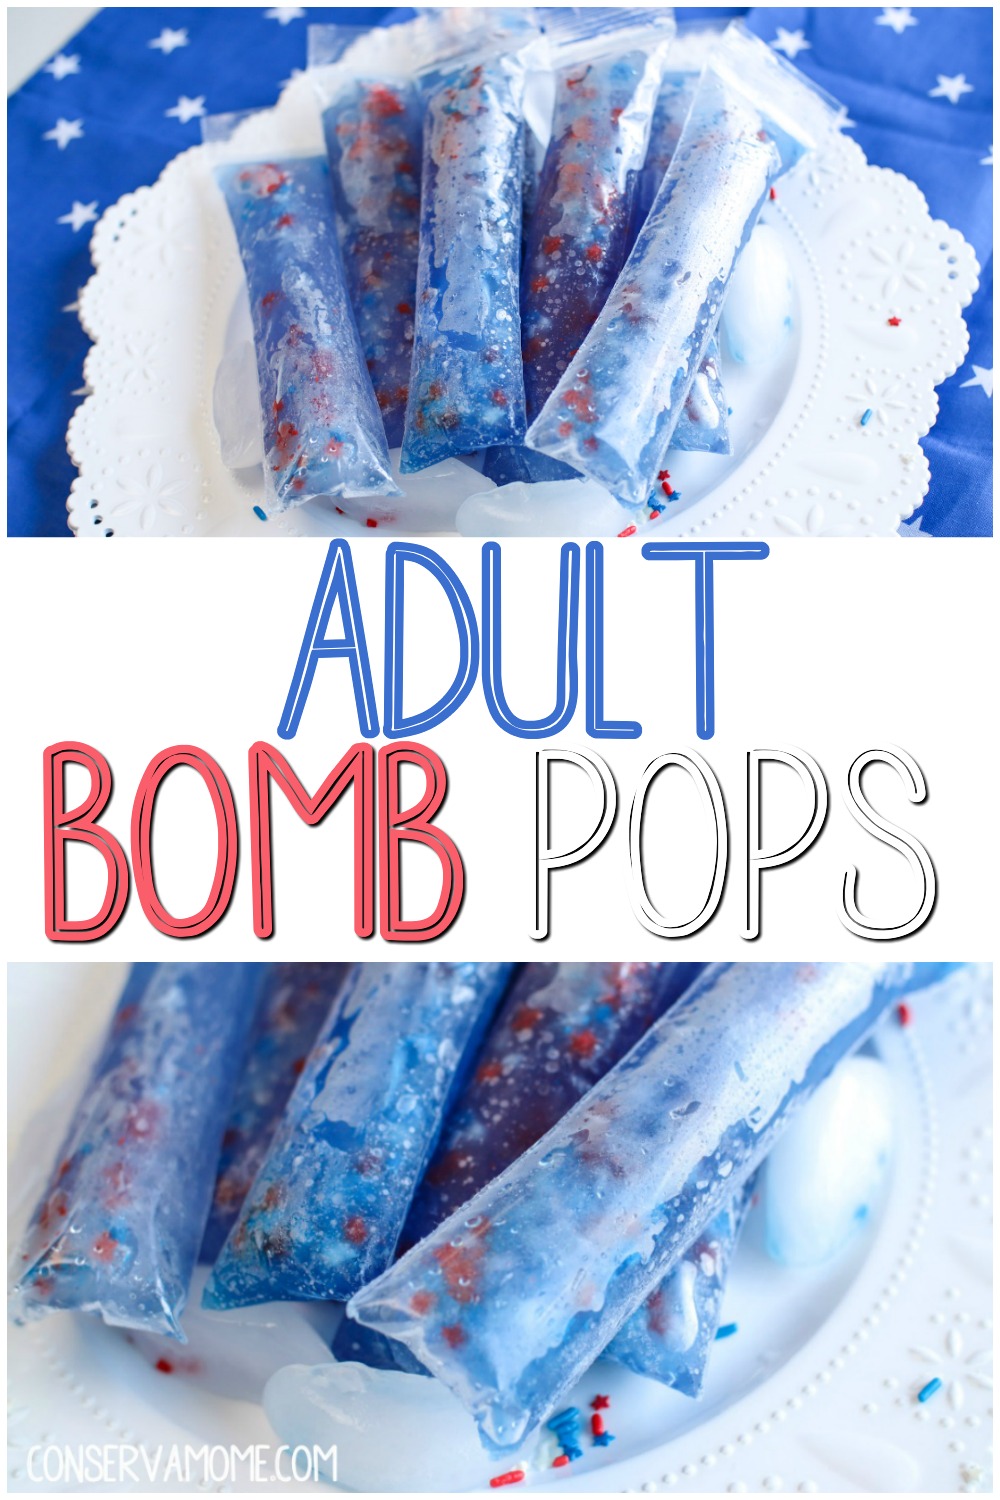 Adult Bomb Pops :An Easy Spiked Freezer pops recipe